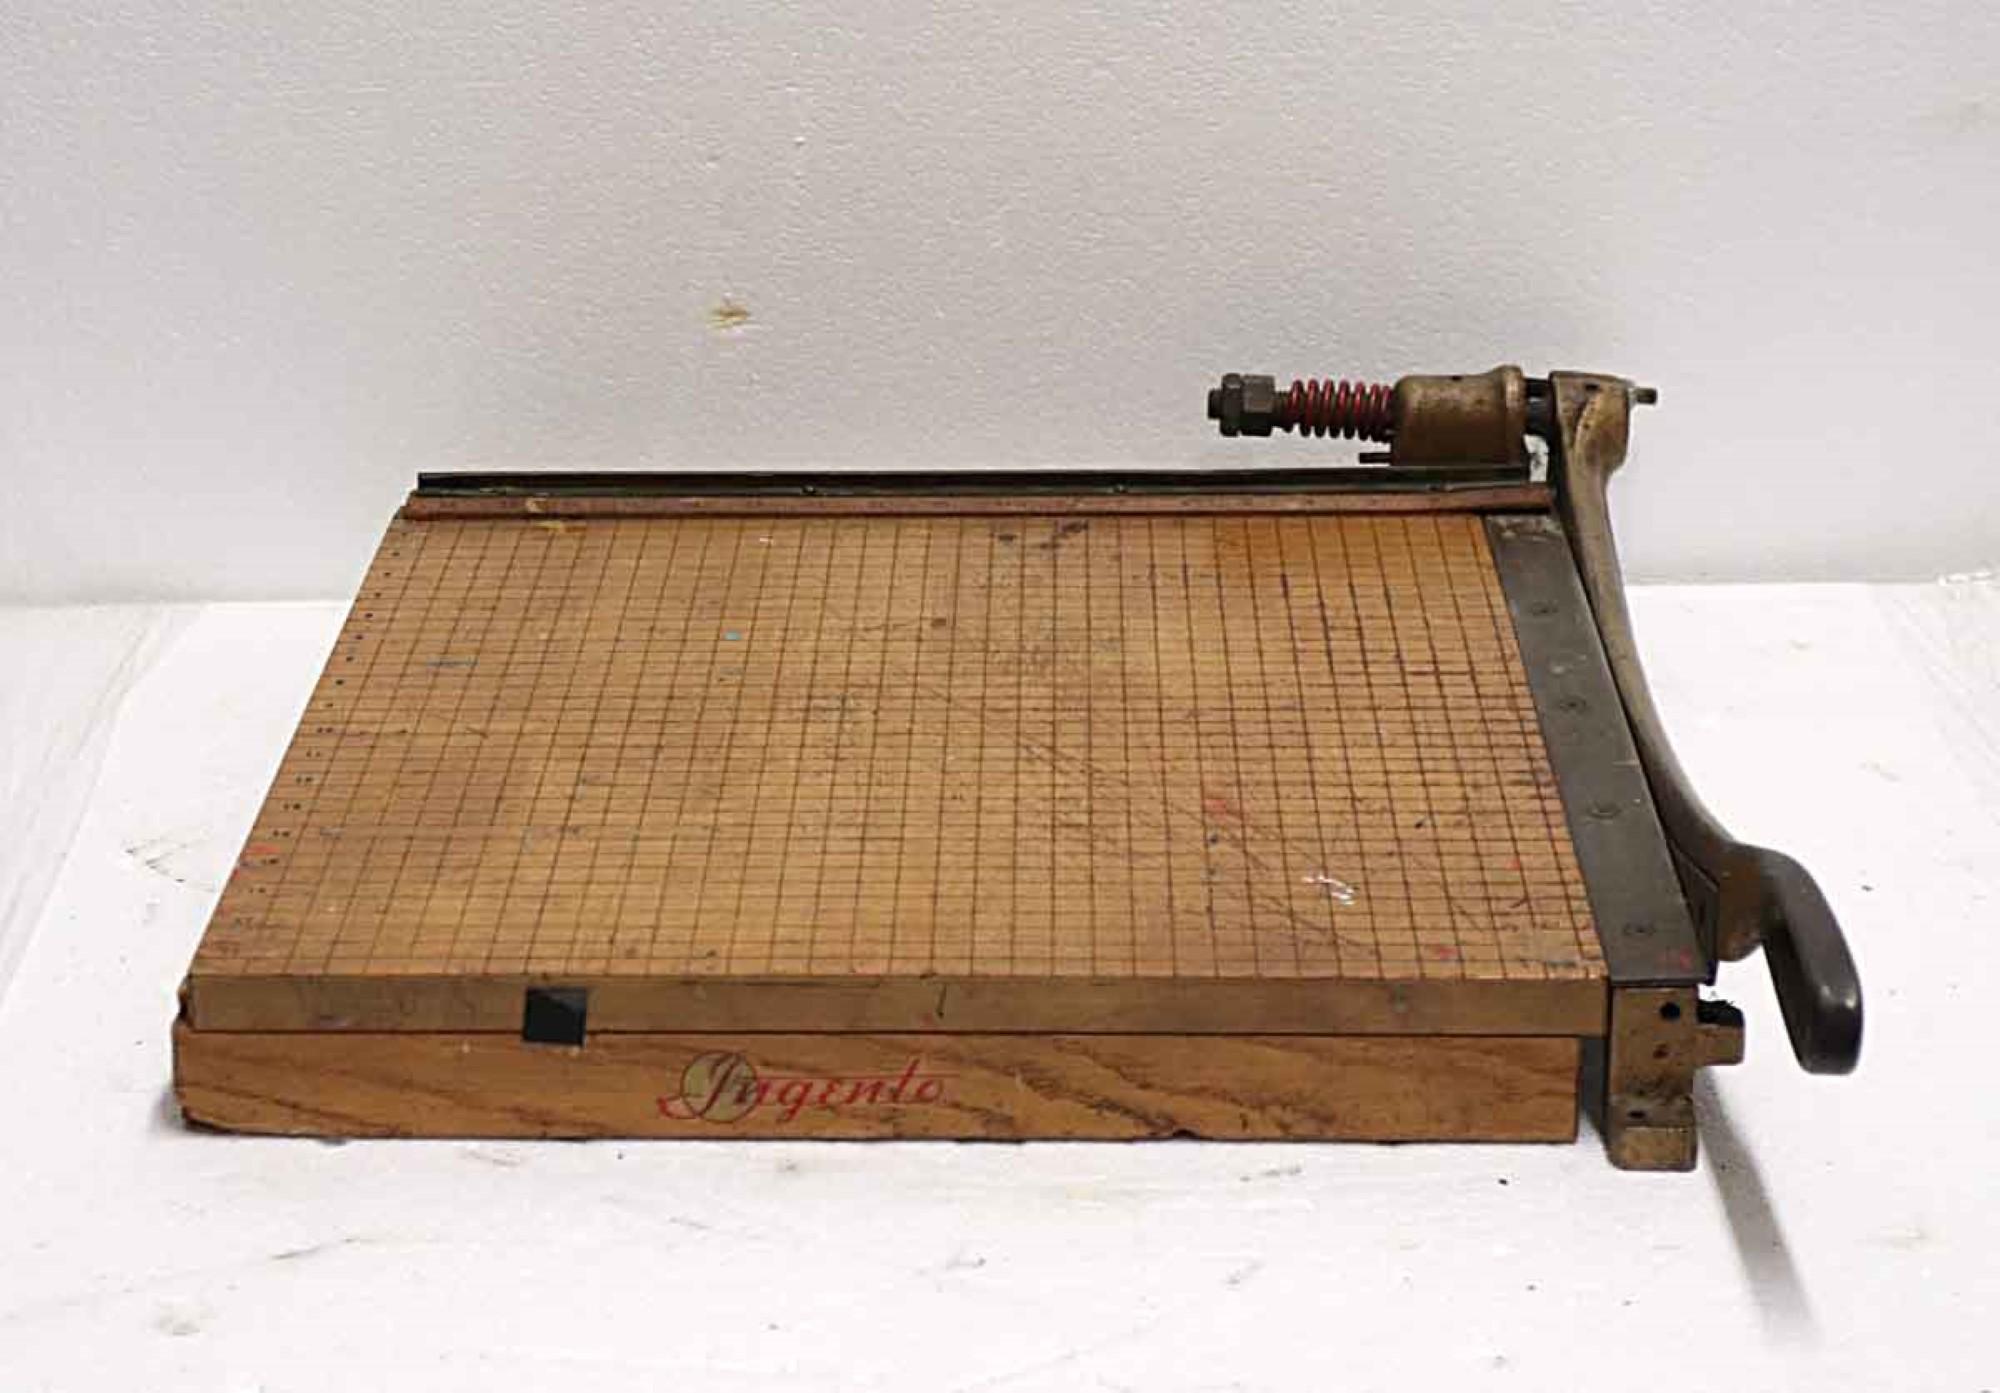 American 1920s High School Art Class Wood & Steel Paper Cutter with Built-In Ruler Guides